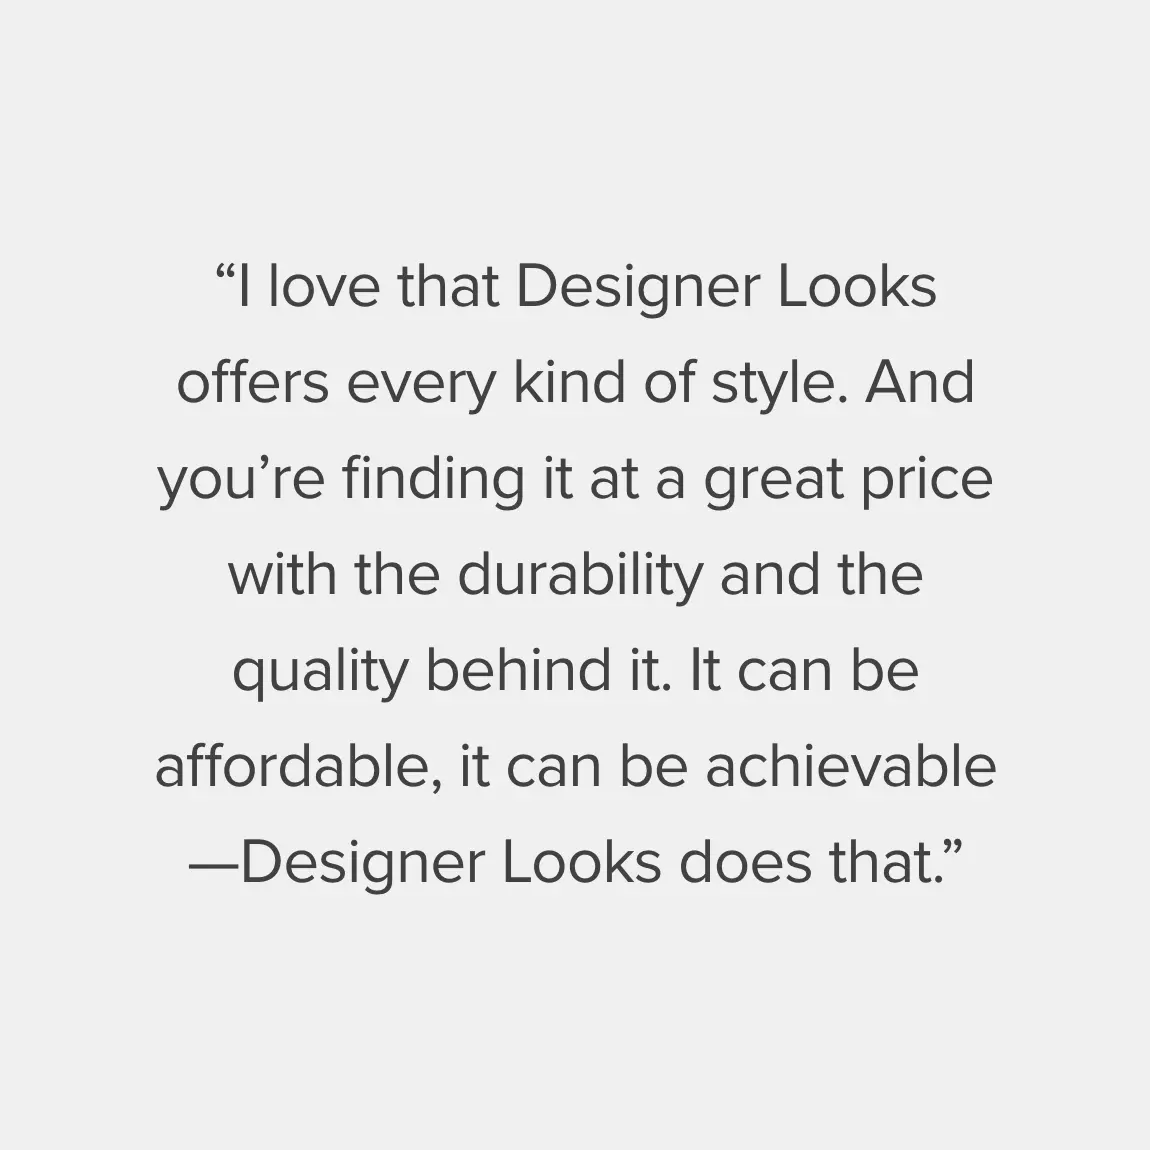 I love that Designer Looks offers every kind of style. And you’re finding it at a great price with the durability and the quality behind it. It can be affordable, it can be achievable—Designer Looks does that.